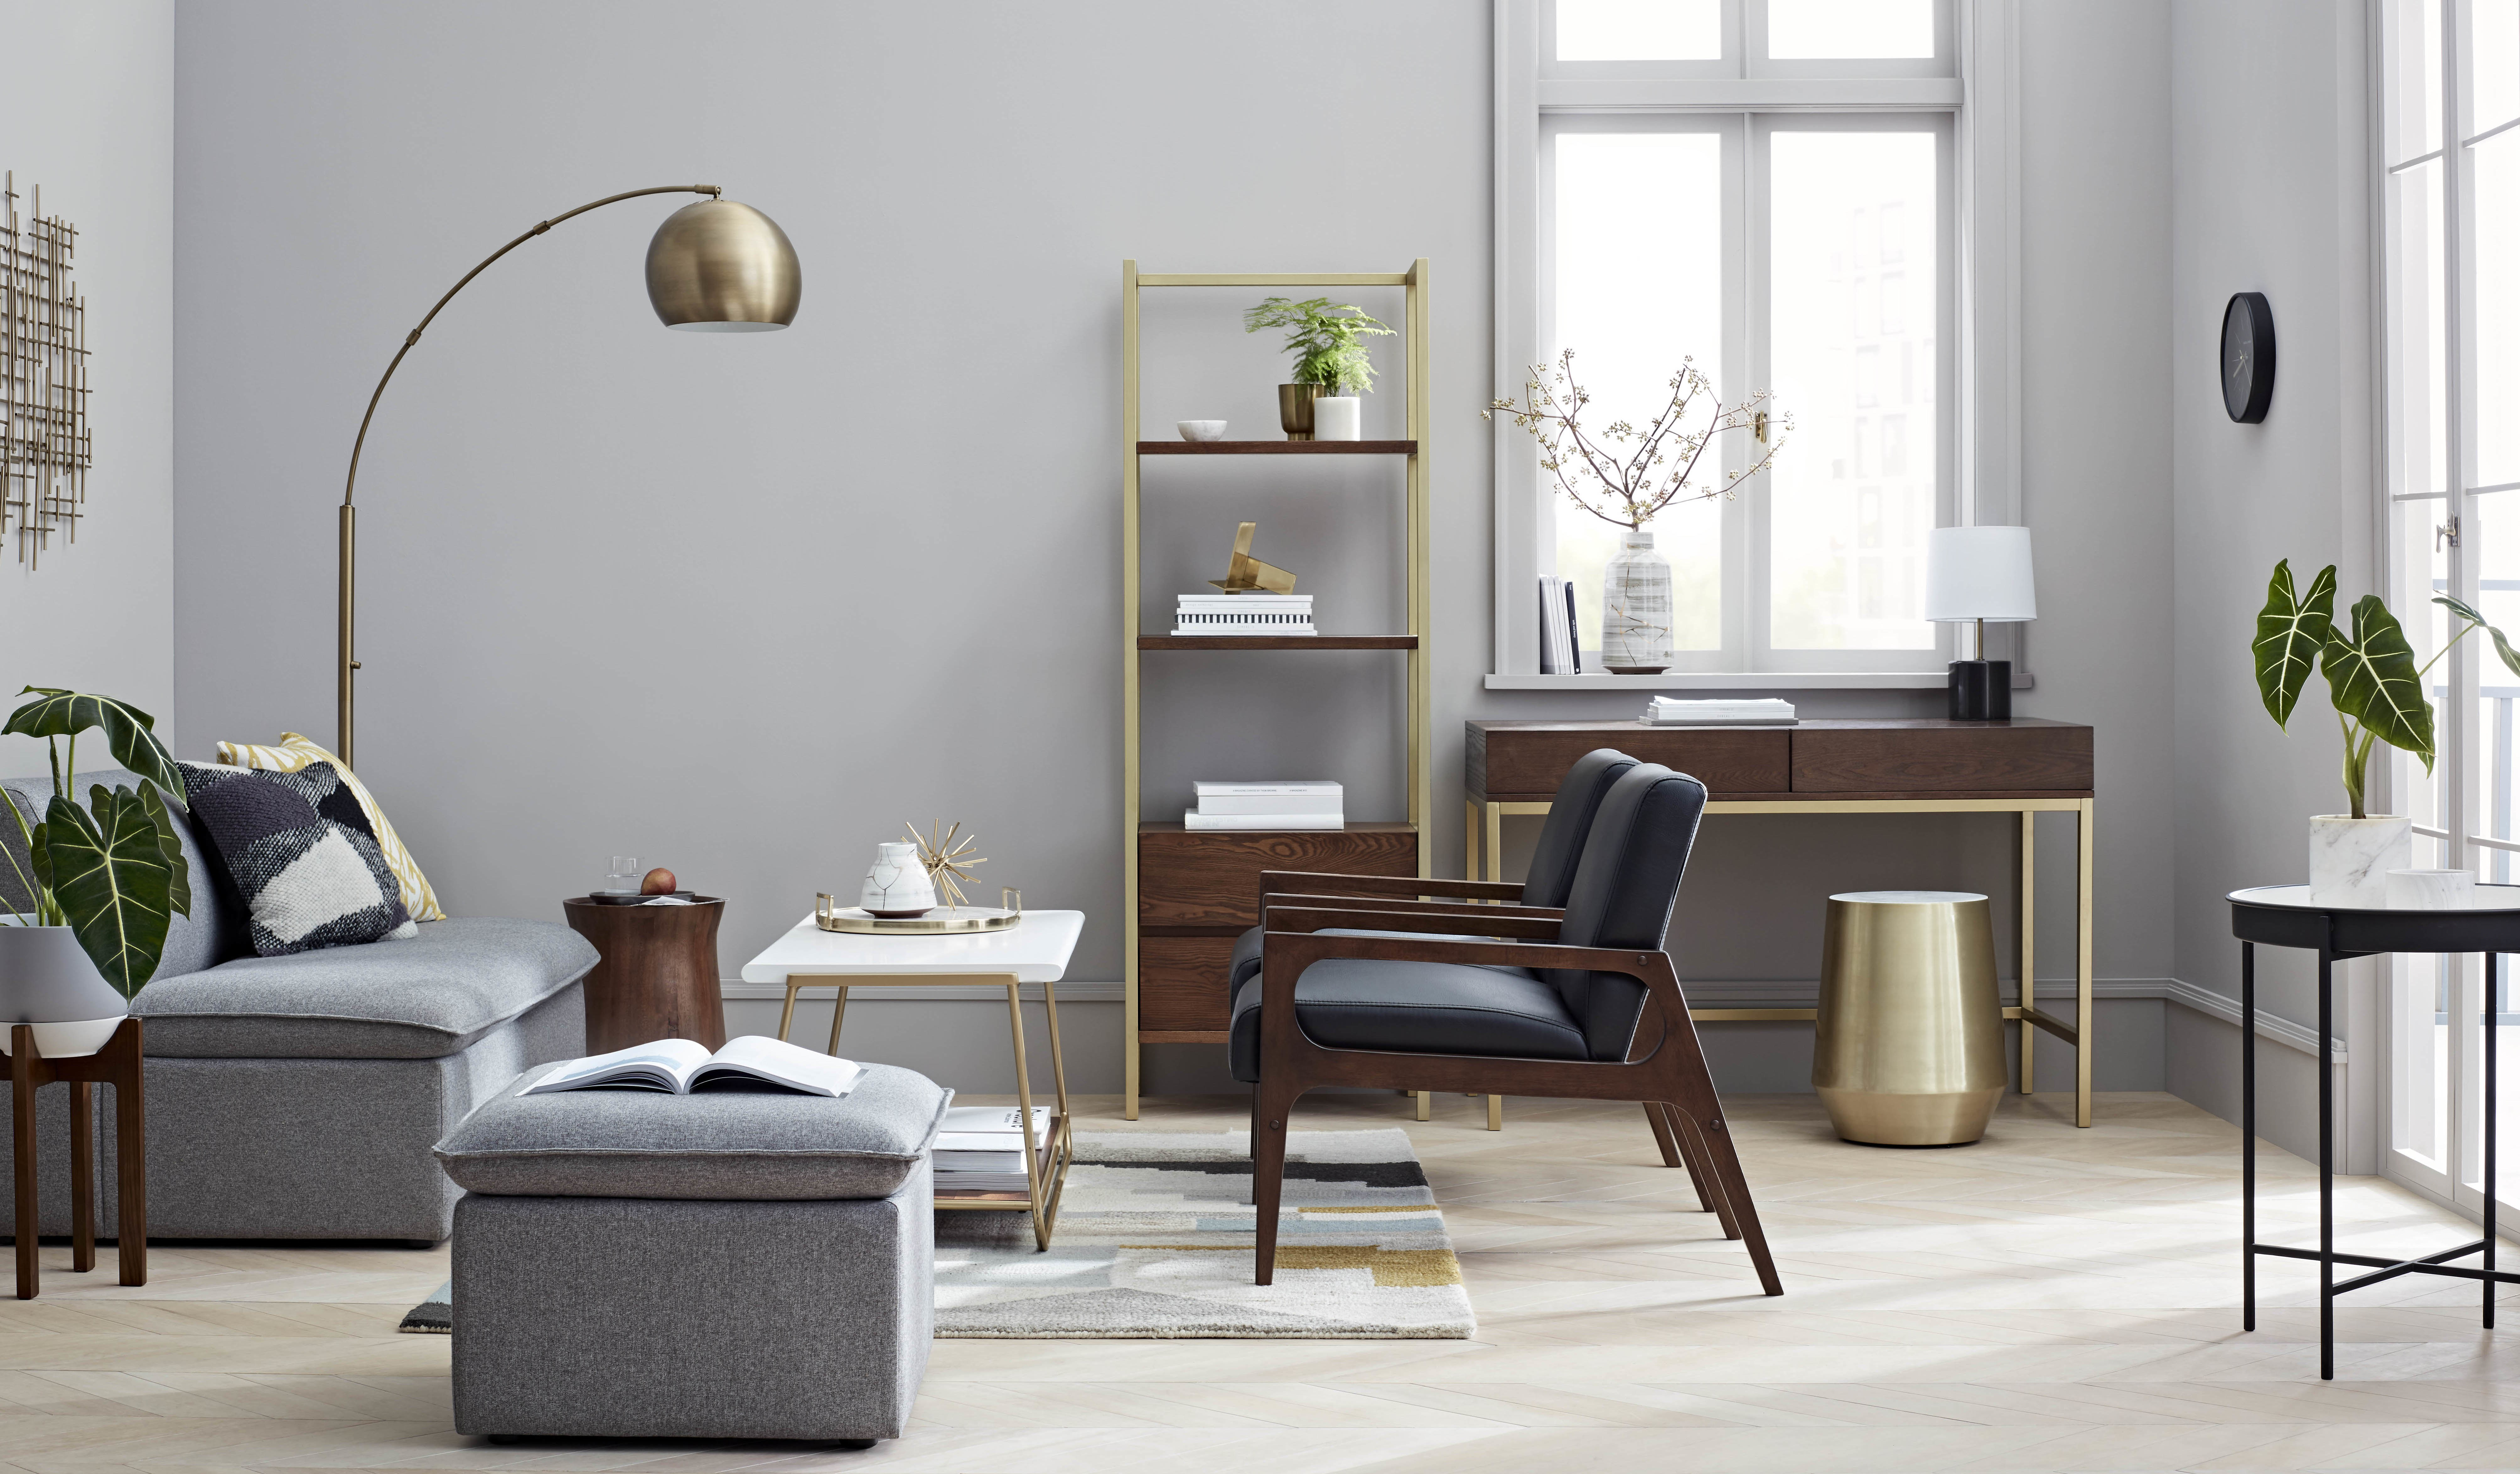 A First Look At Project 62 Targets Newest Furniture Line with size 8029 X 4696